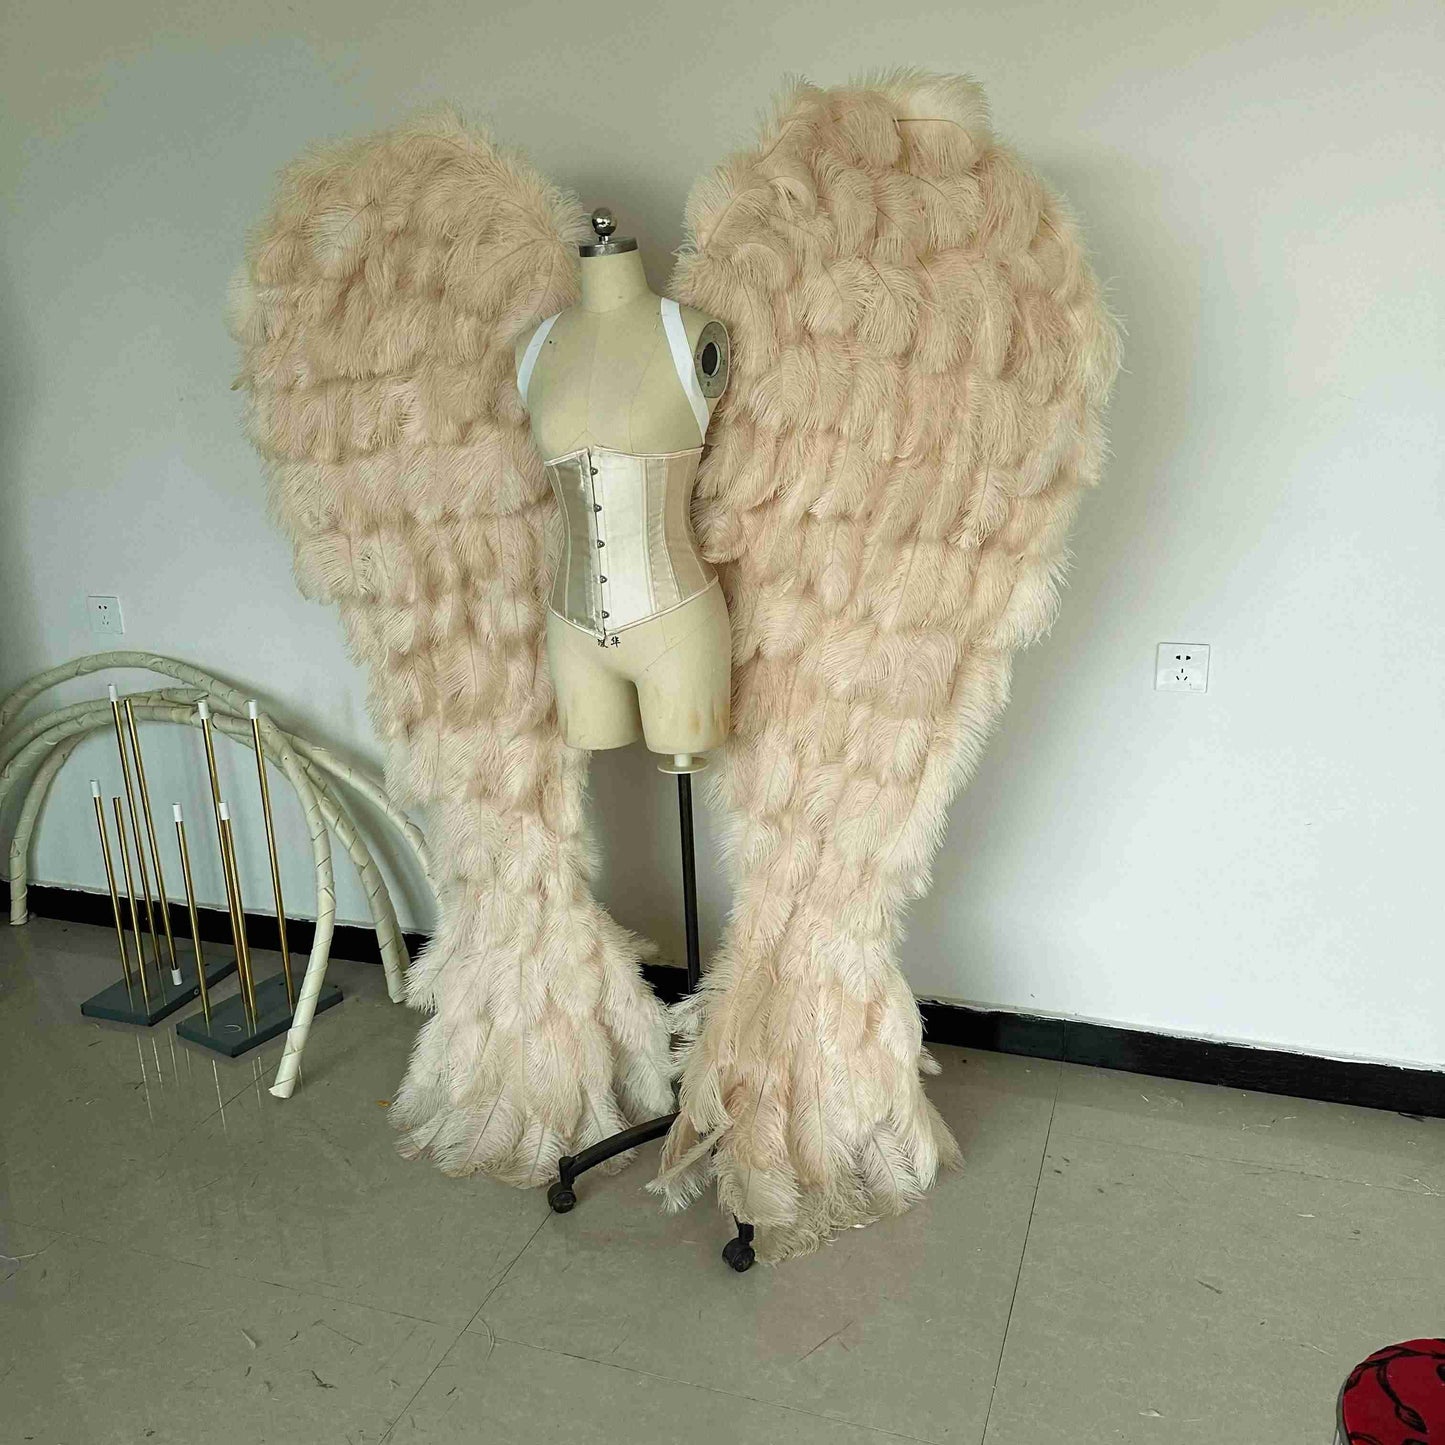 Our luxury beige angel wings from the left side. Made from ostrich feathers. Wings for angel costume. Suitable for photoshoots especially for boudoirs.